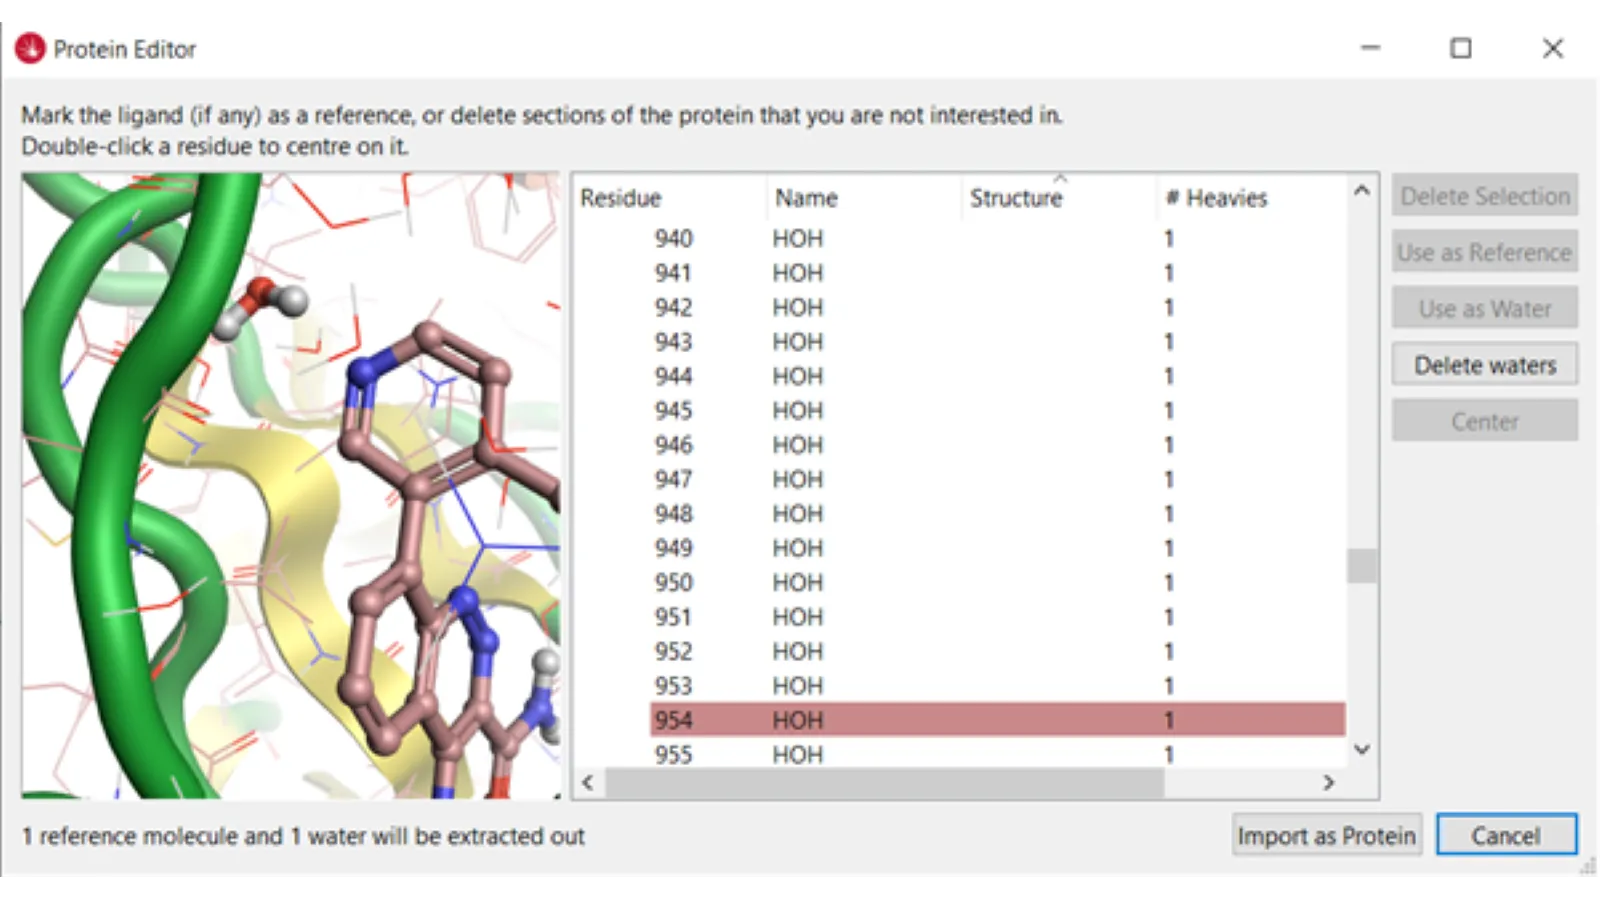 Select the water molecule that you want to replace within the protein active site.